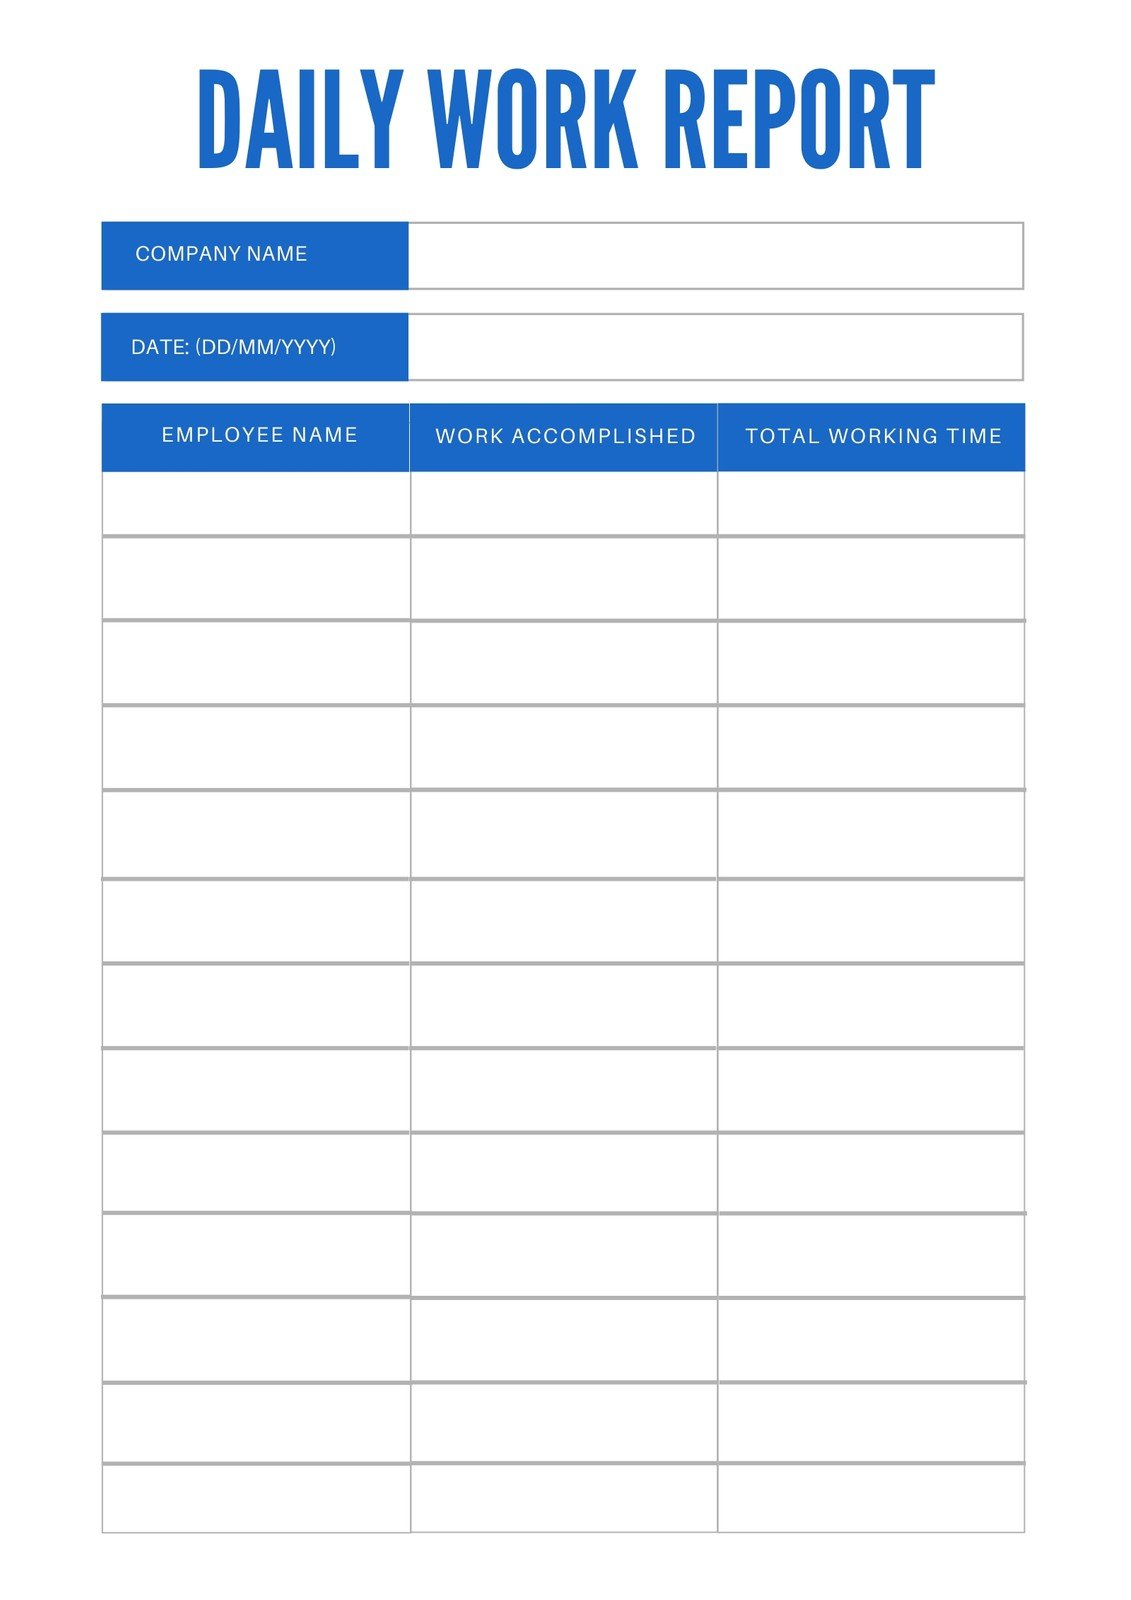 Free printable, customizable daily report templates  Canva With Daily Work Report Template